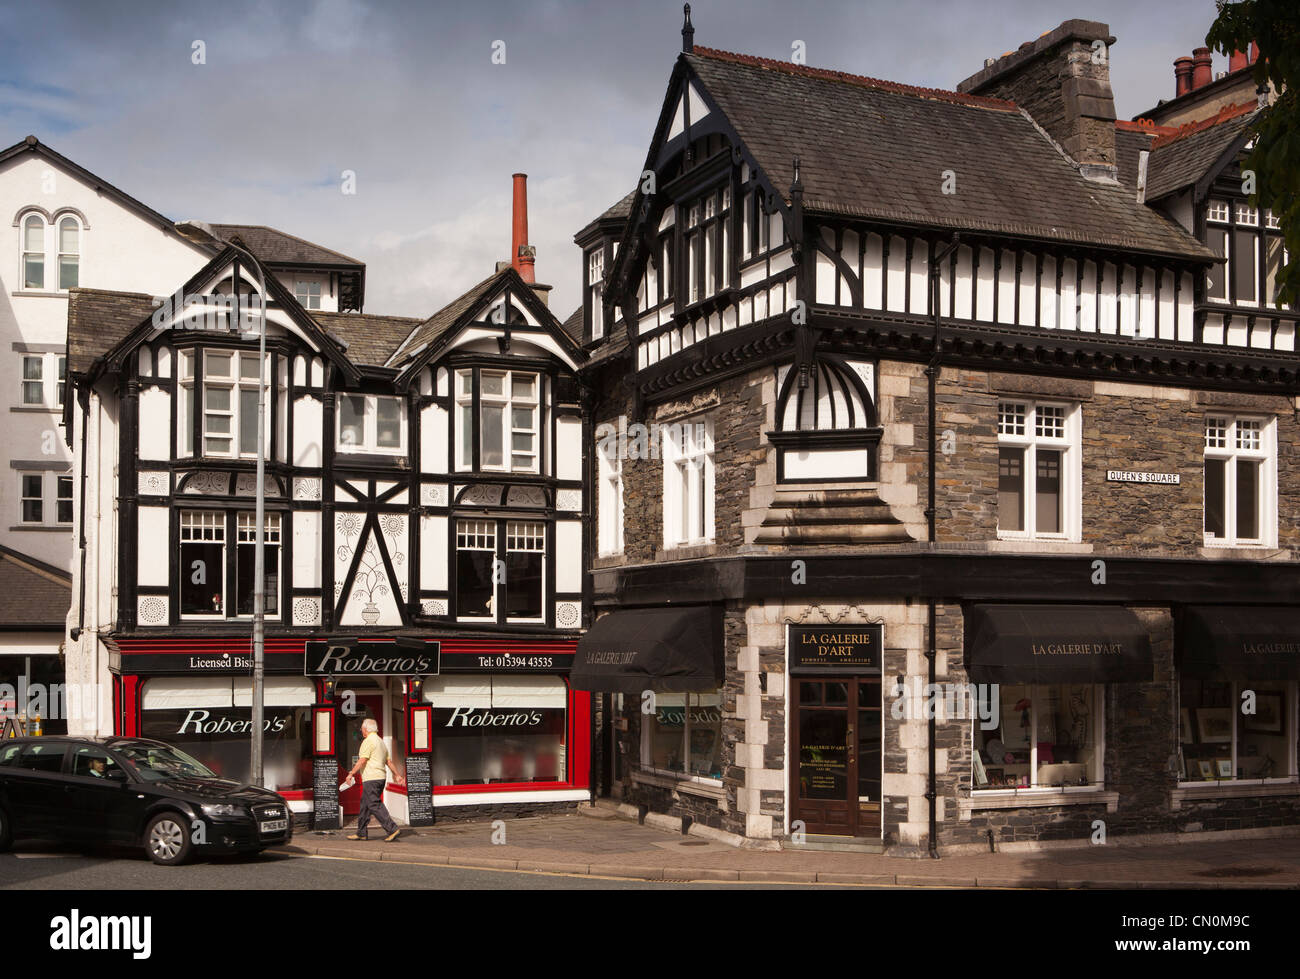 UK, Cumbria, Bowness on Windermere, Queen’s Square Stock Photo